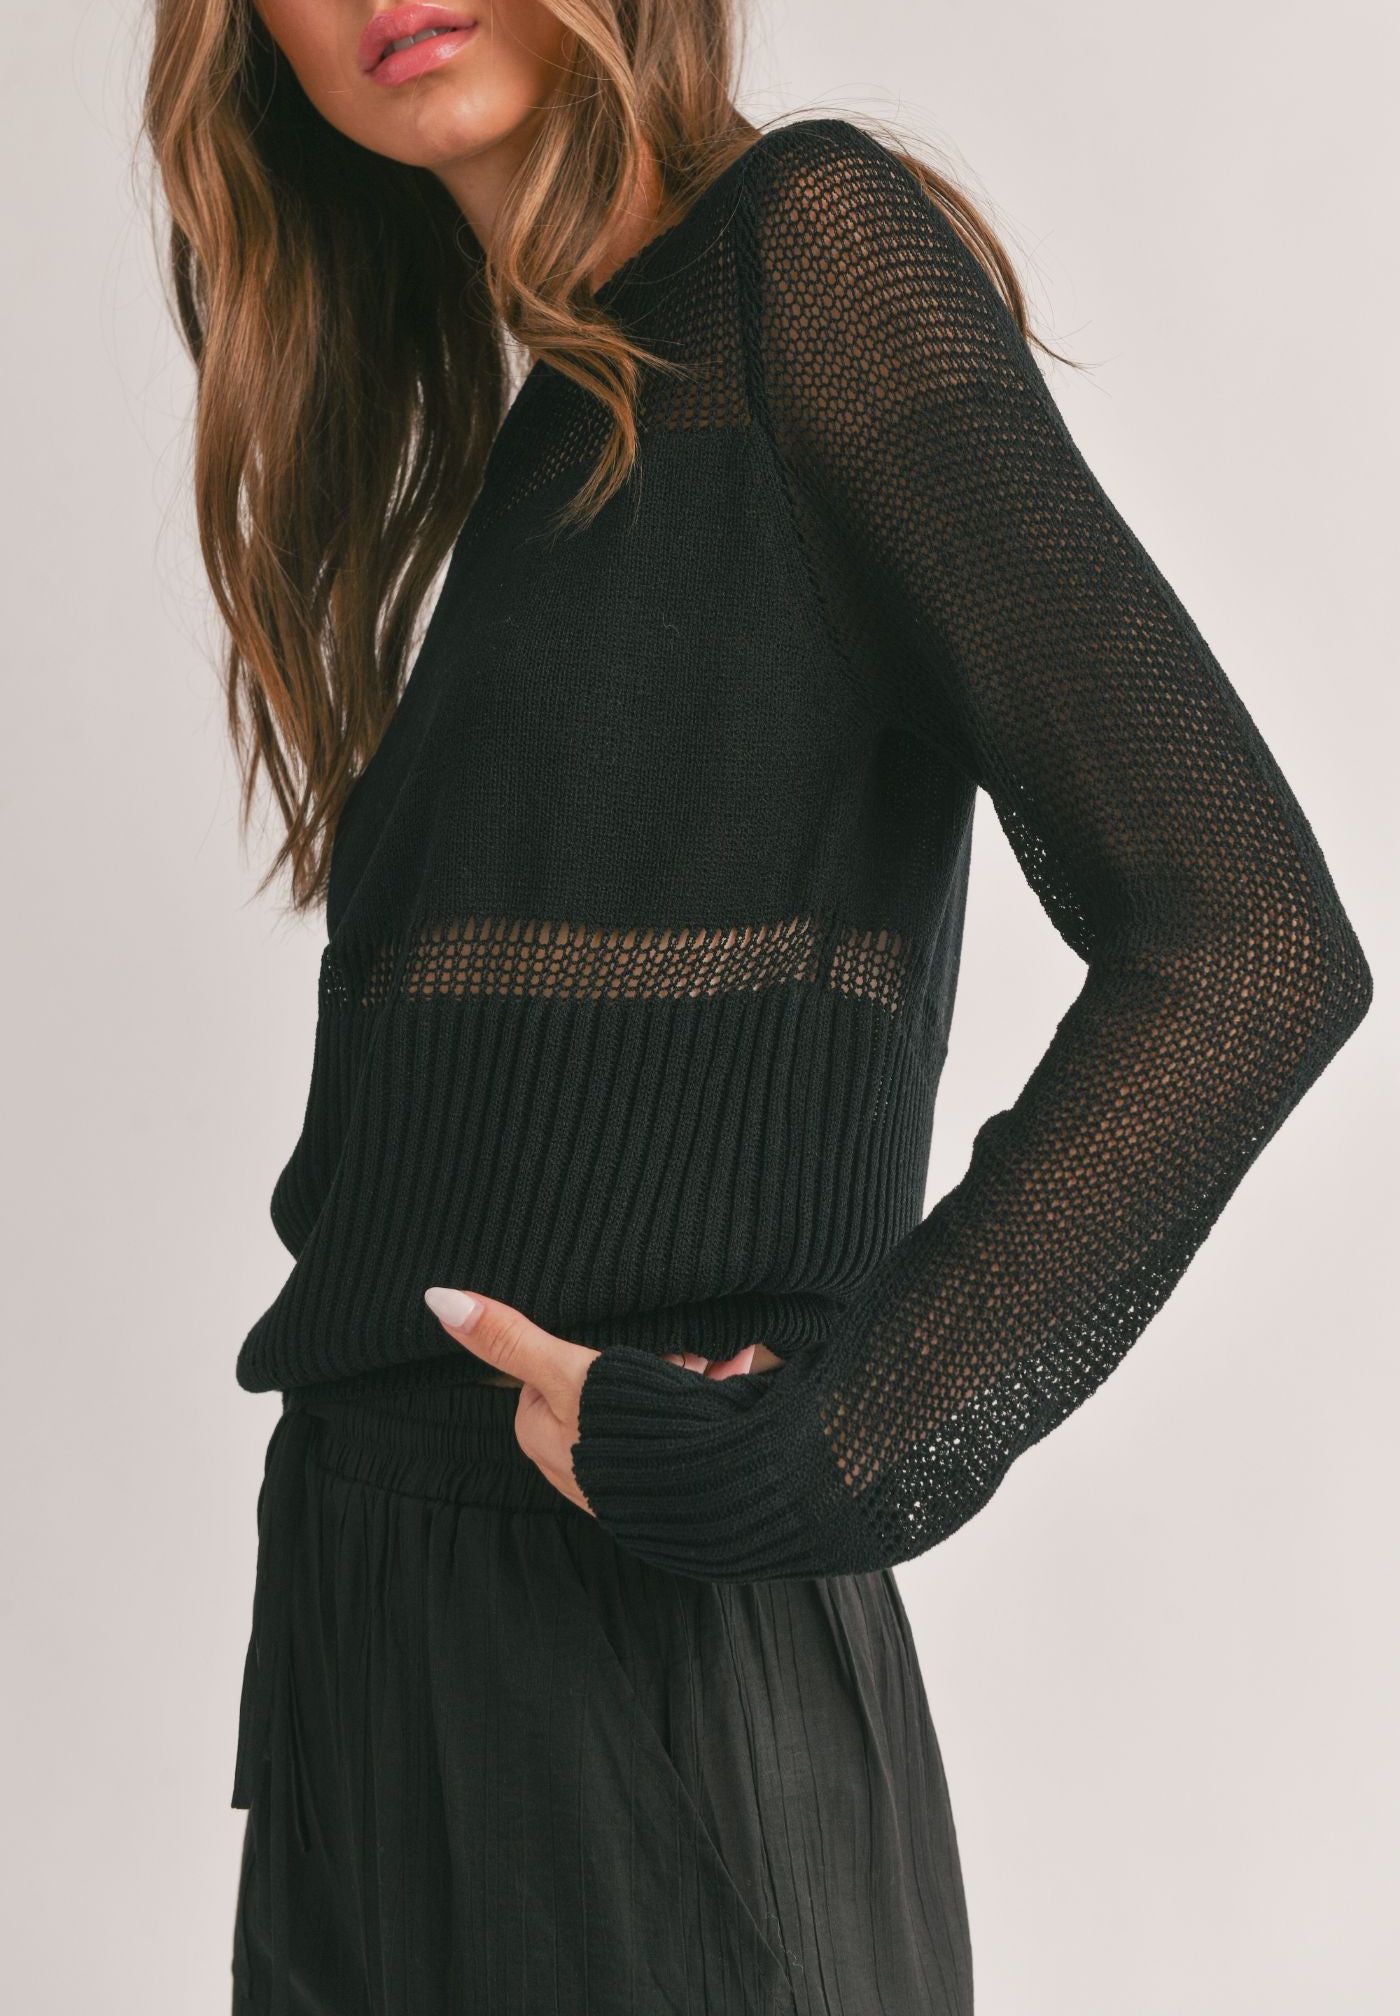 Sage The Label, Something to Desire Sweater in Black - Boutique Dandelion